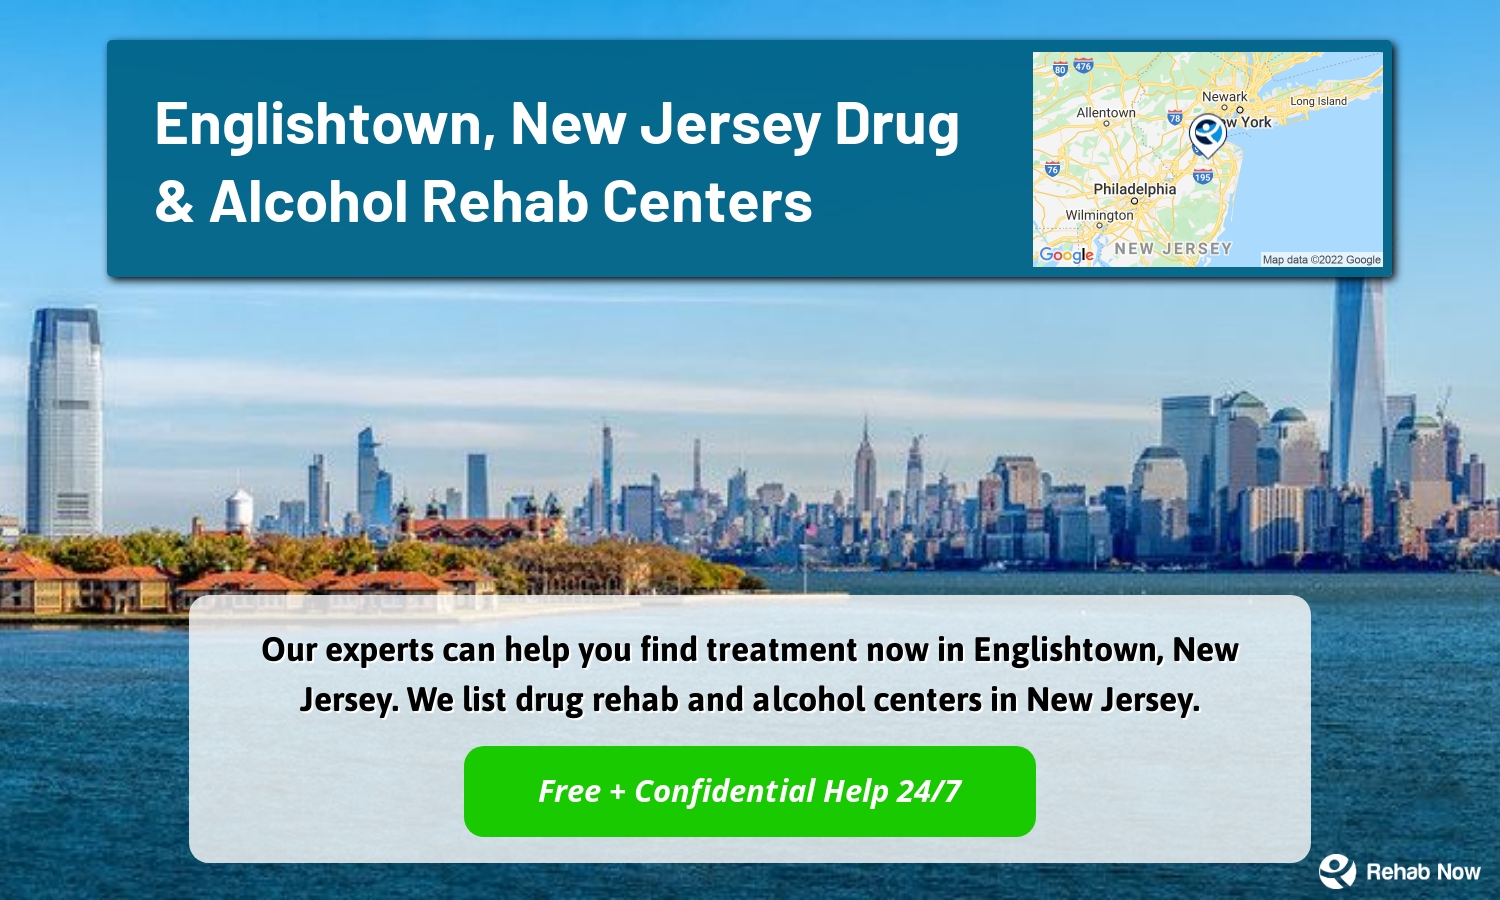 Our experts can help you find treatment now in Englishtown, New Jersey. We list drug rehab and alcohol centers in New Jersey.